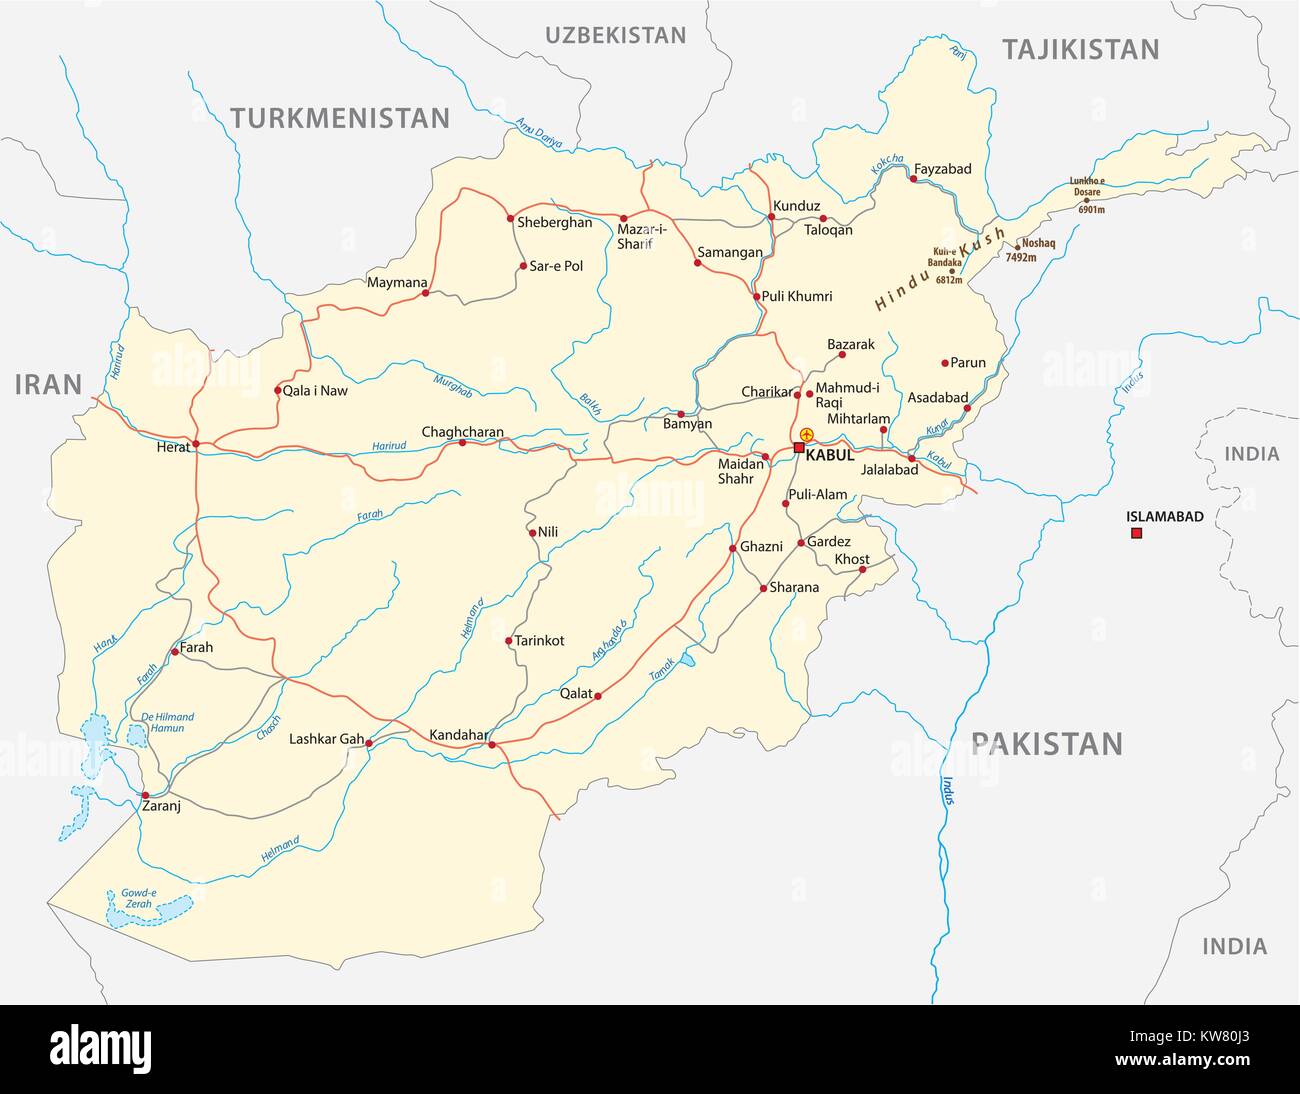 TomTom - Do you know where the longest ring road in the world is? It's the  Afghanistan A01! This is a 2,092 km road that encircles a huge area at the  heart